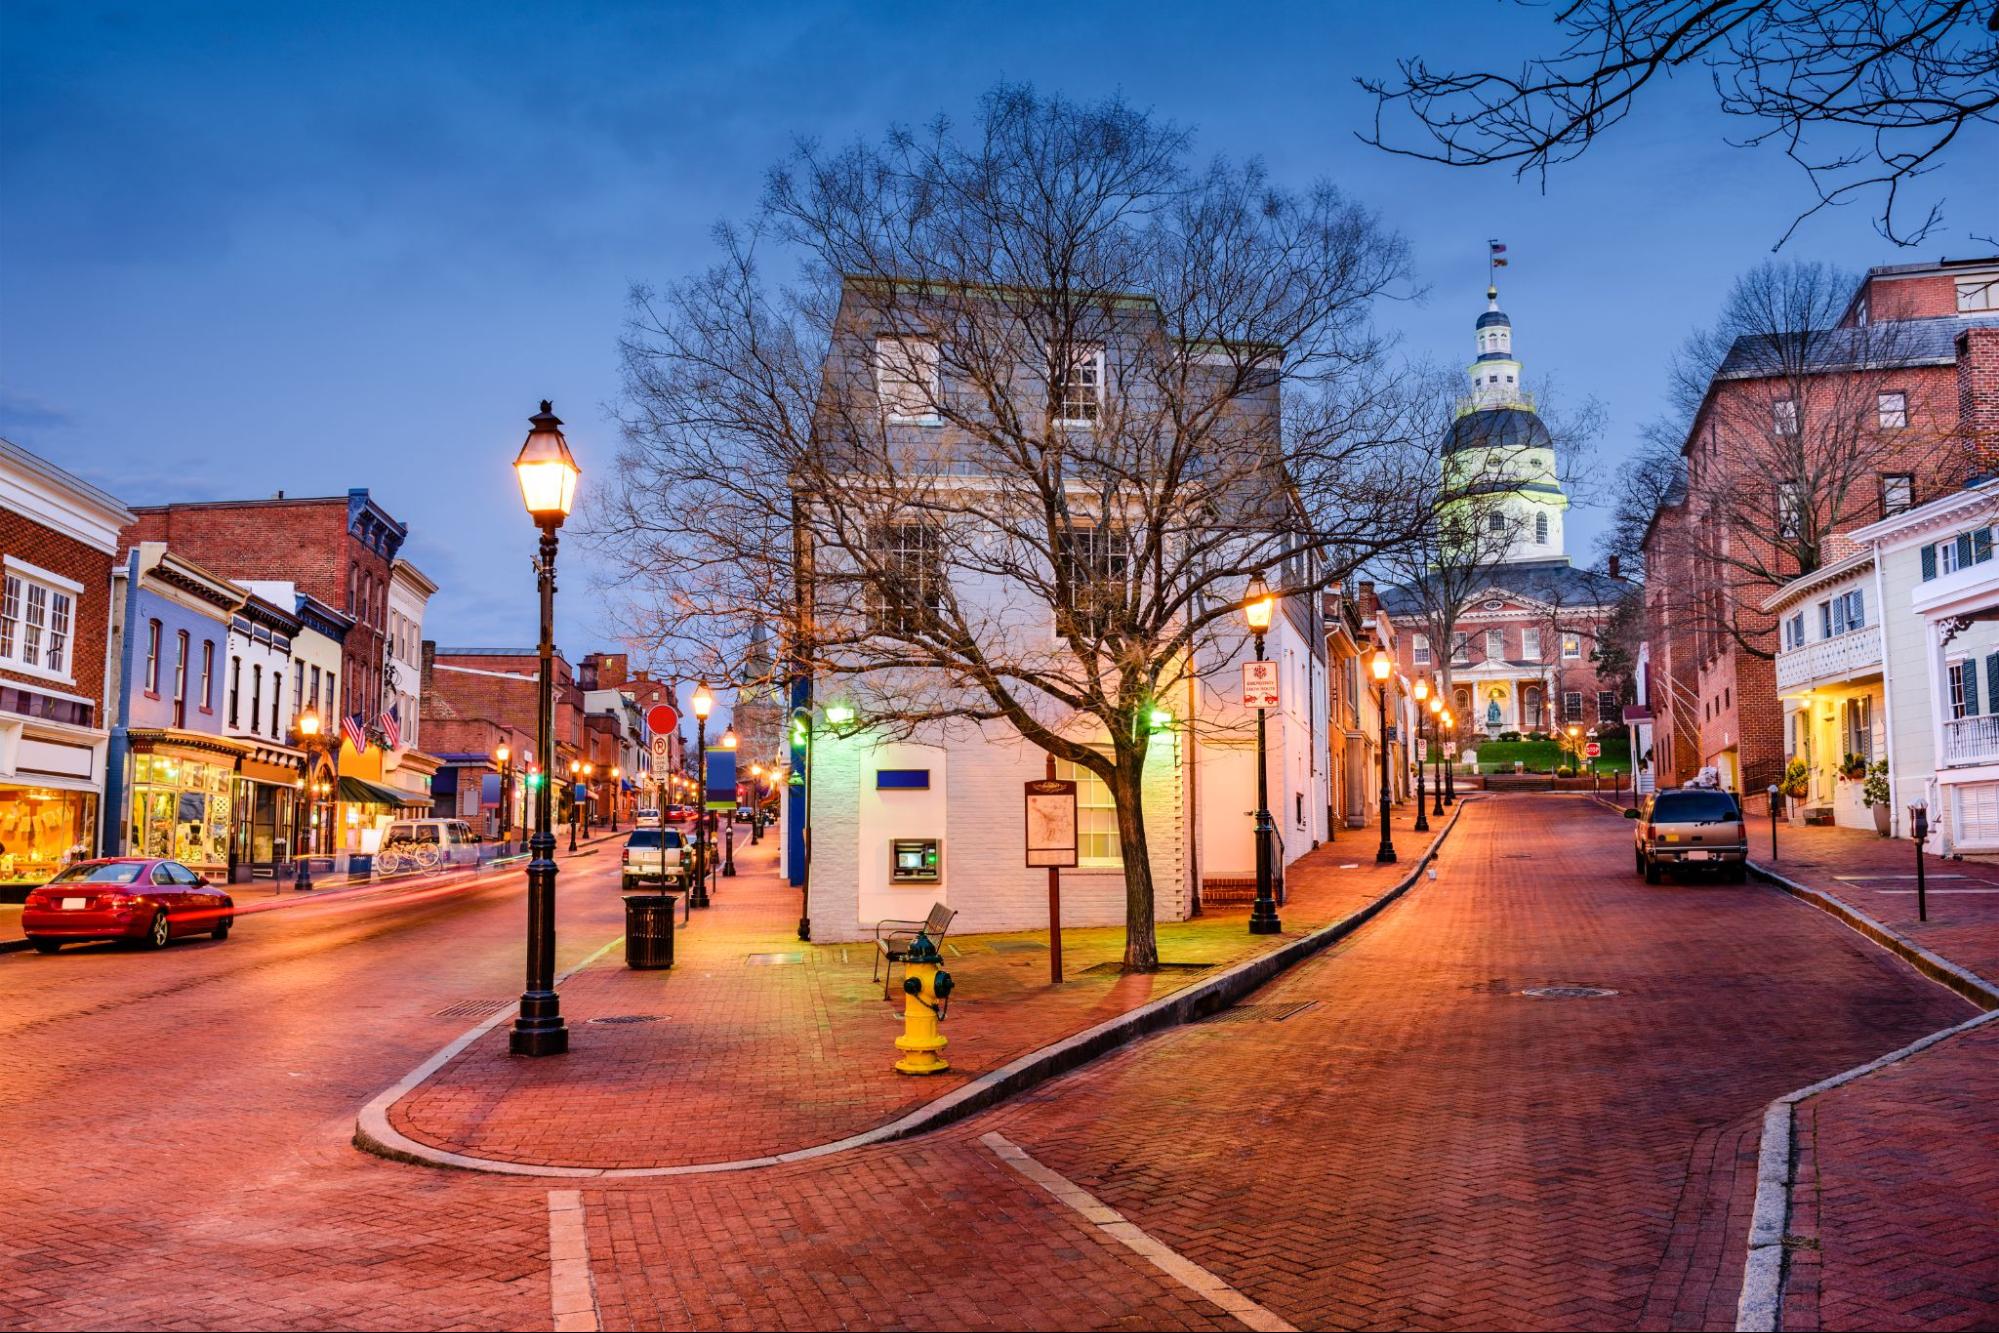 5 Things to See in Annapolis During Plebe Parents’ Weekend